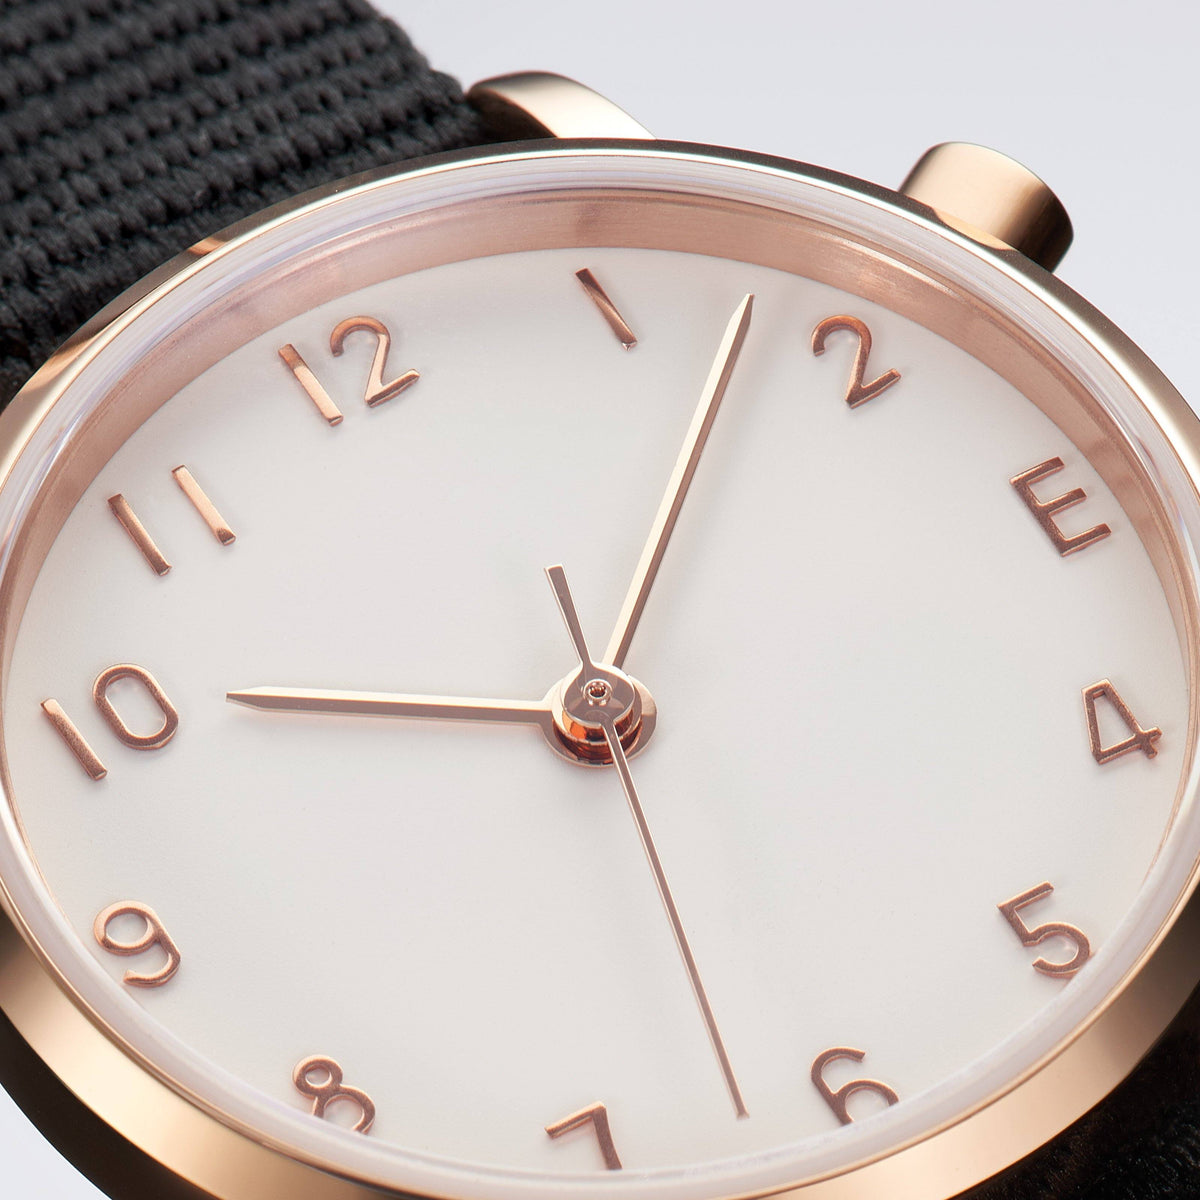 The White and Rose Gold Watch - Ivory (Kids)